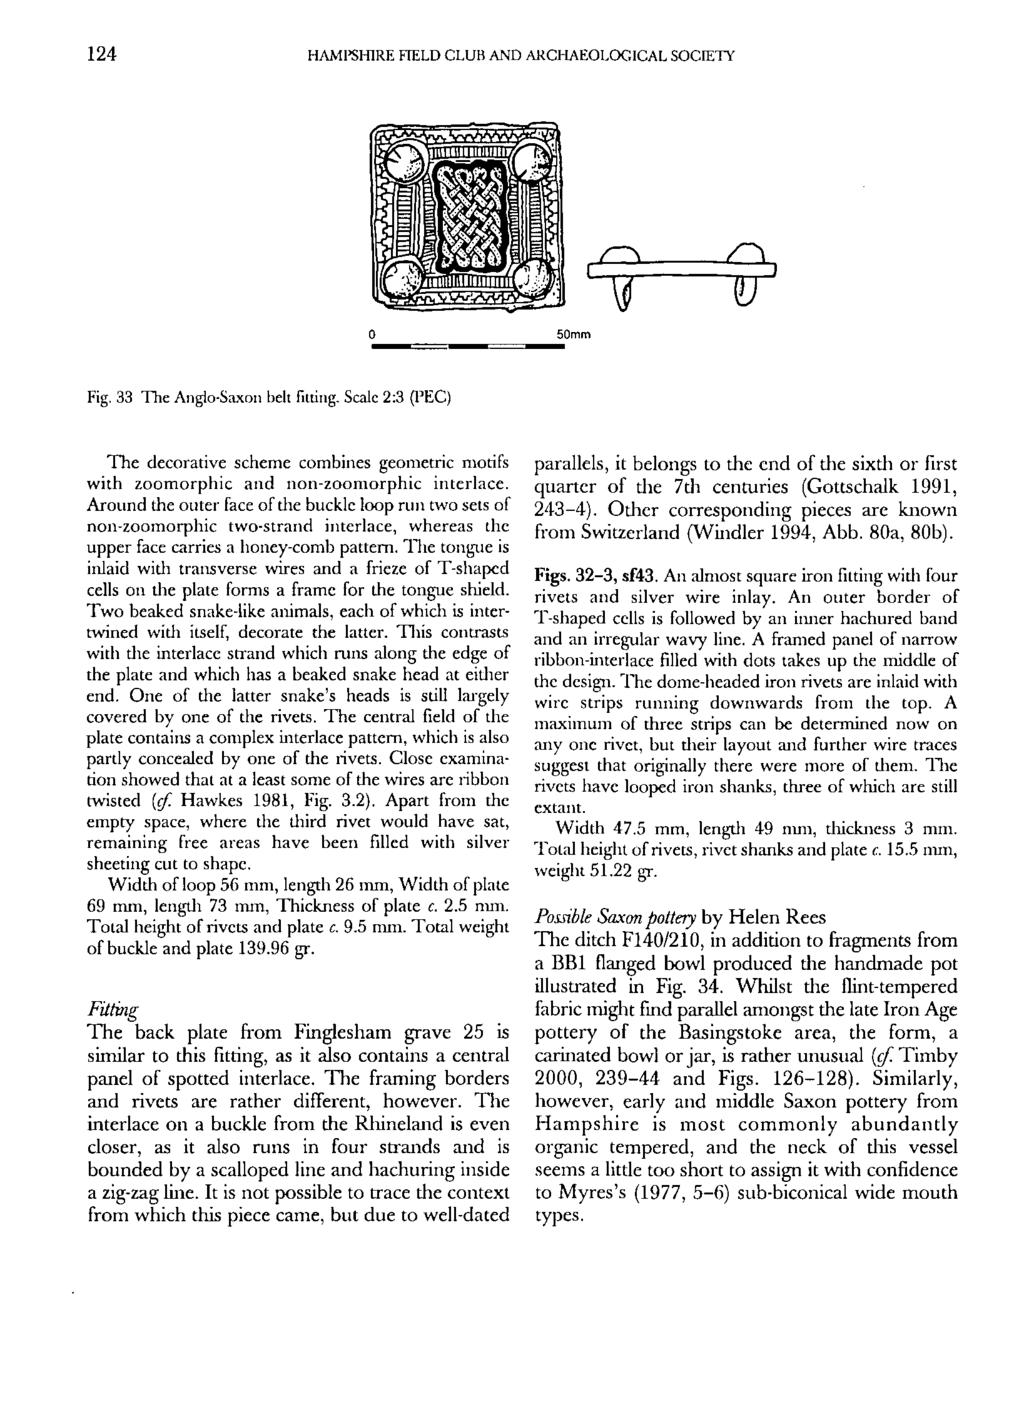 124 HAMPSHIRE FIELD CLUB AND ARCHAEOLOGICAL SOCIETY ZZL m. B ^r v Fig. 33 The Anglo-Saxon beltfilling.